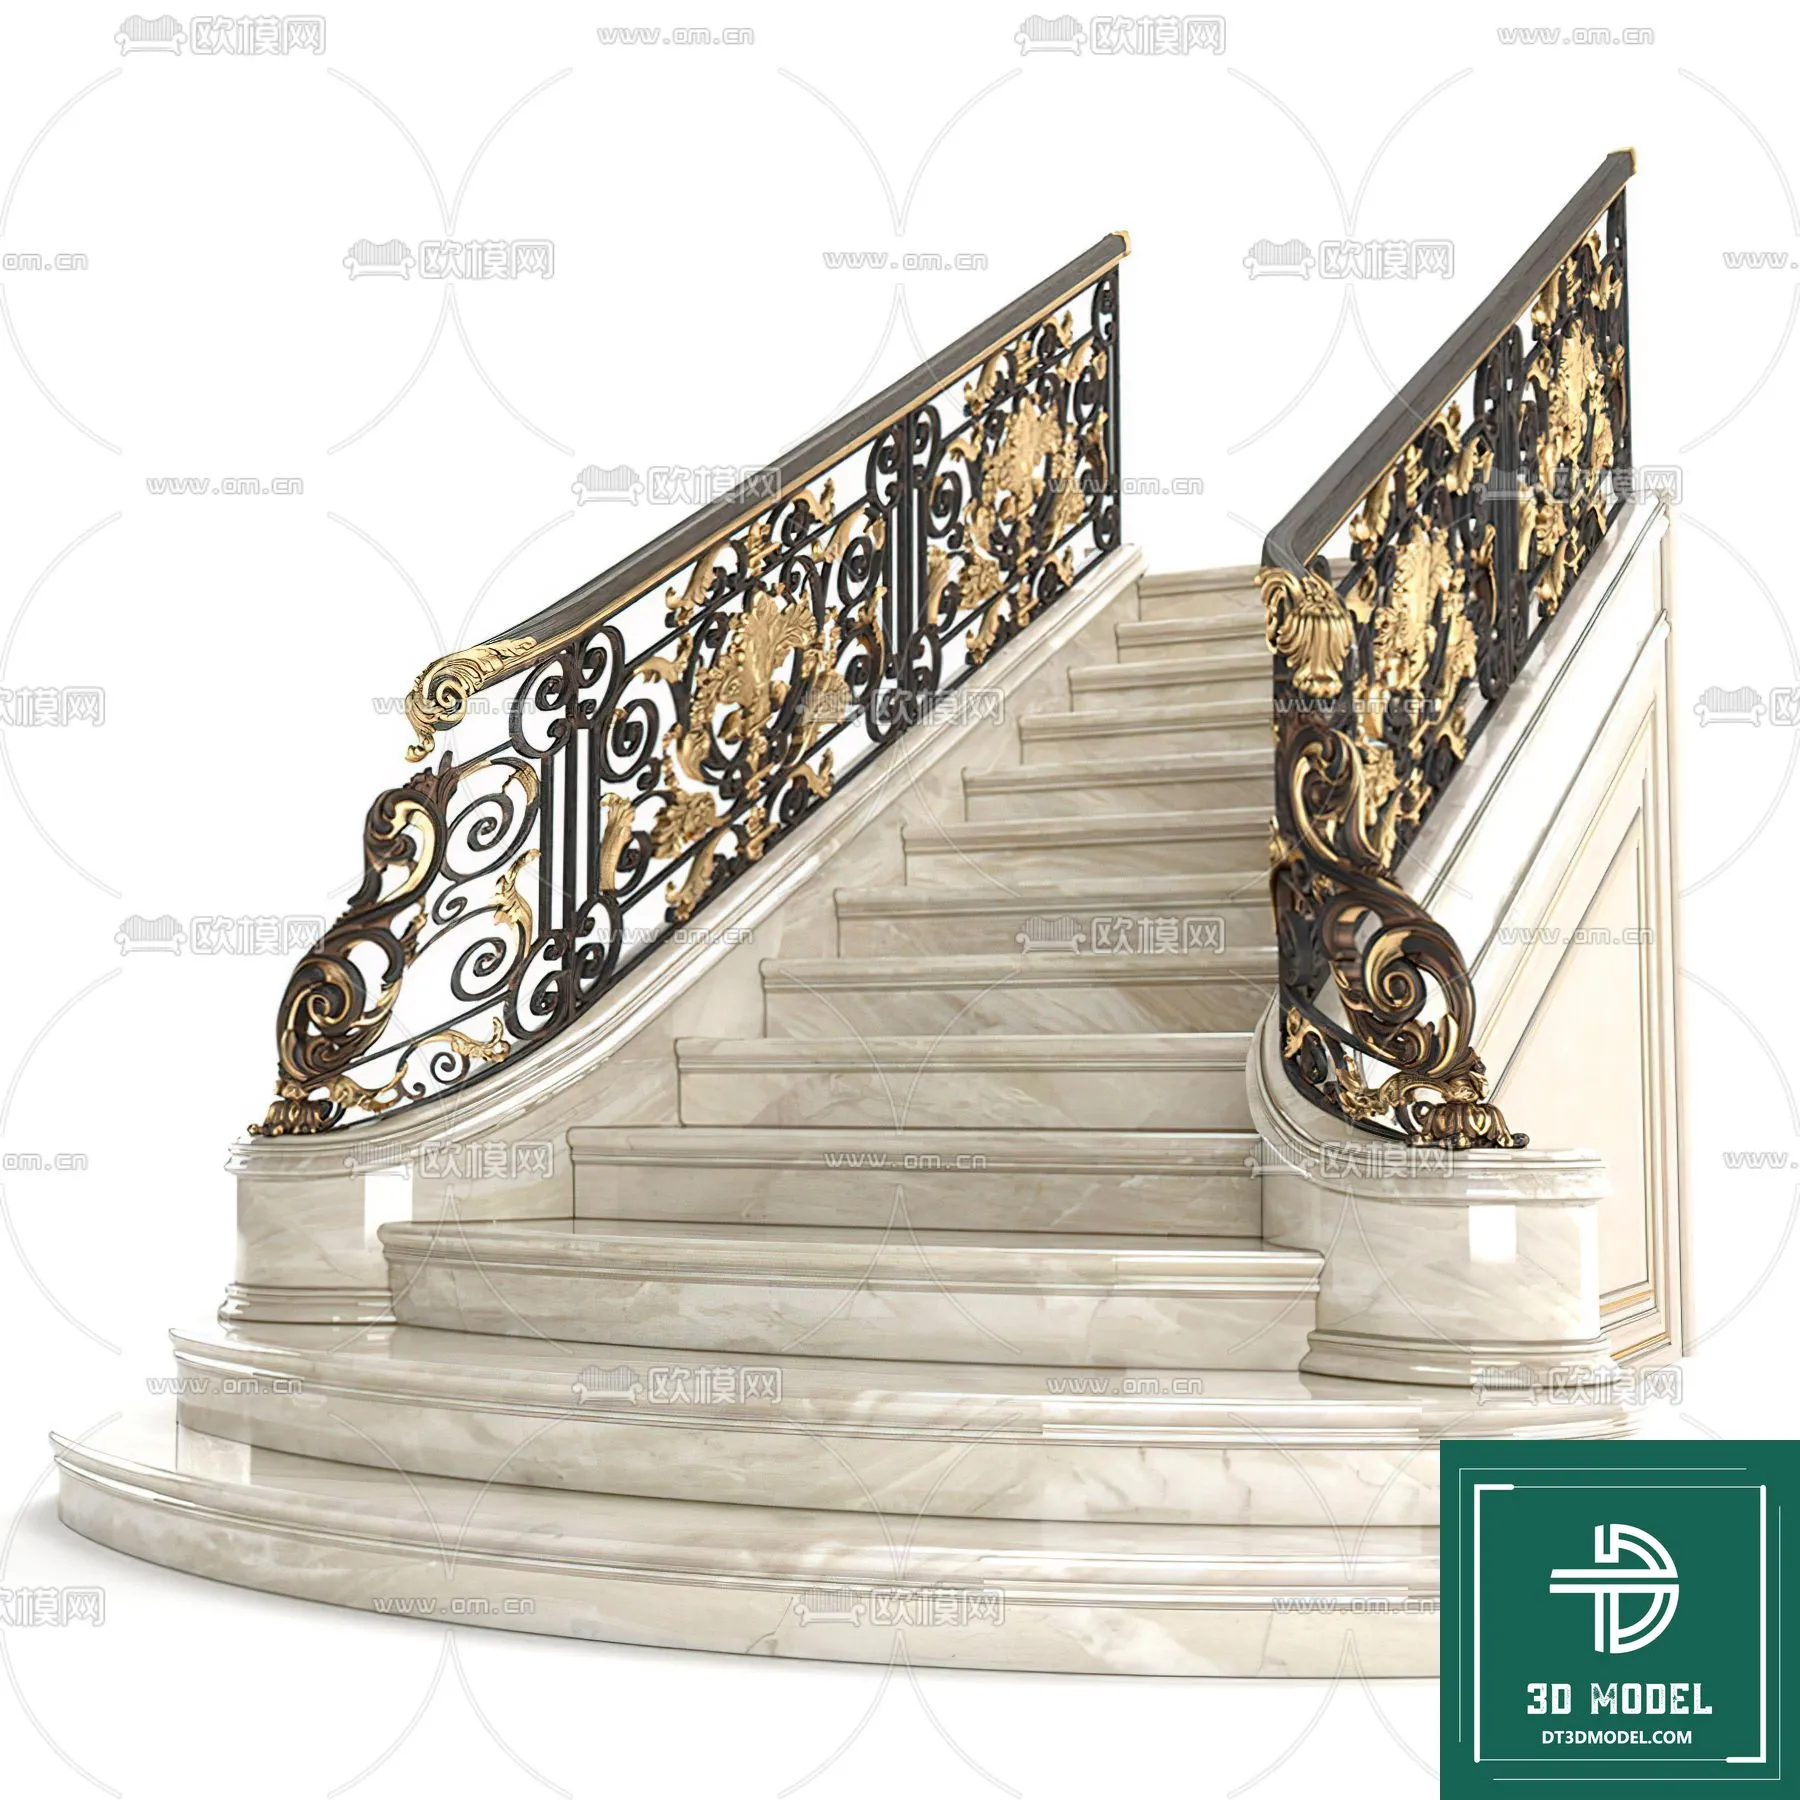 STAIR – 3DS MAX MODELS – 012 – PRO